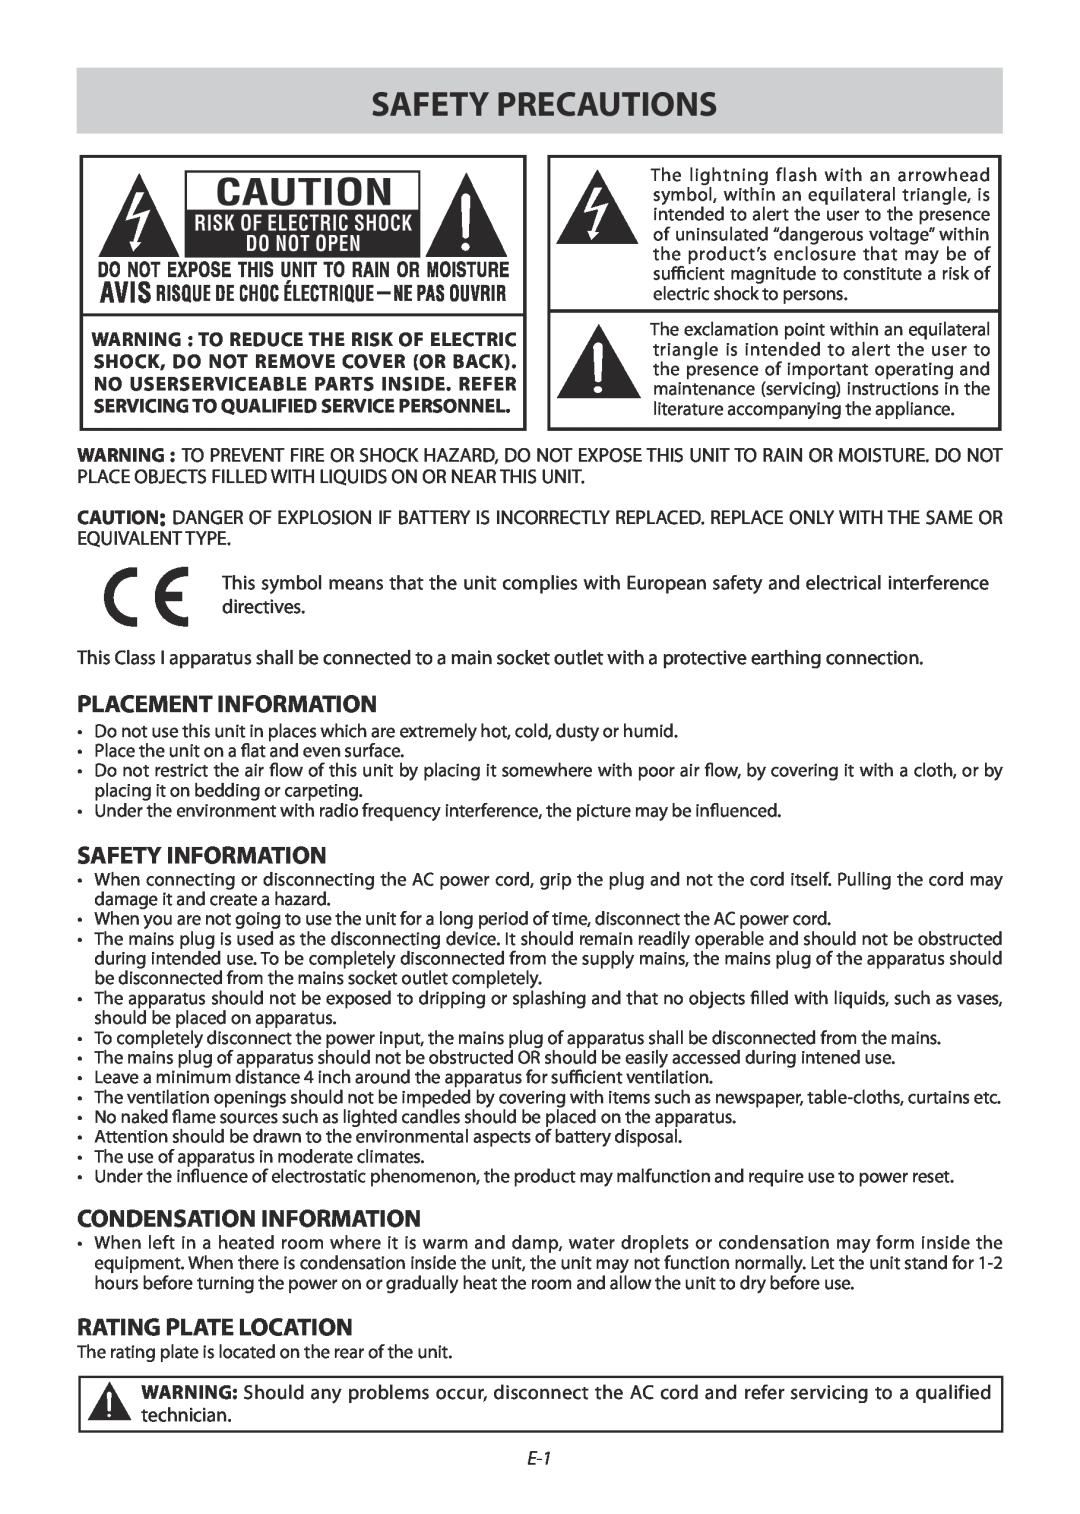 Technika 42-502 manual Safety Precautions, Placement Information, Safety Information, Condensation Information 